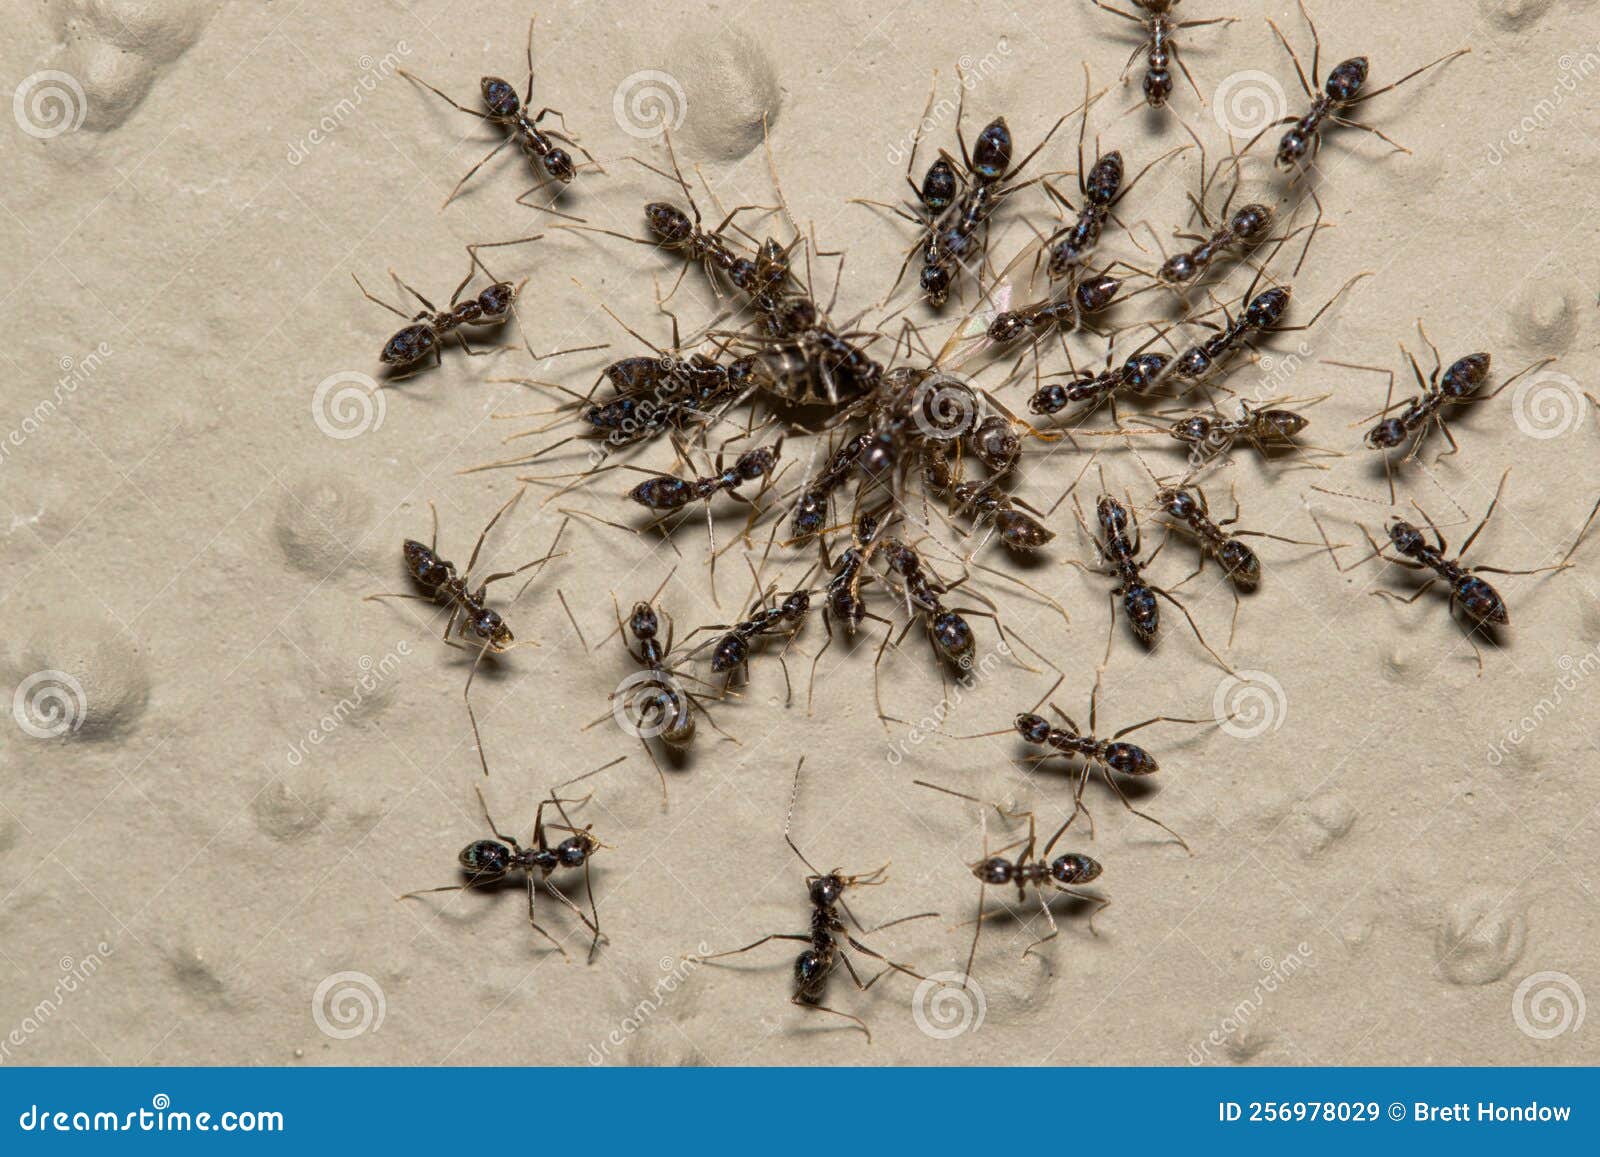 longhorn crazy ants (paratrechina longicornis) swarming and attacking a much larger ant.